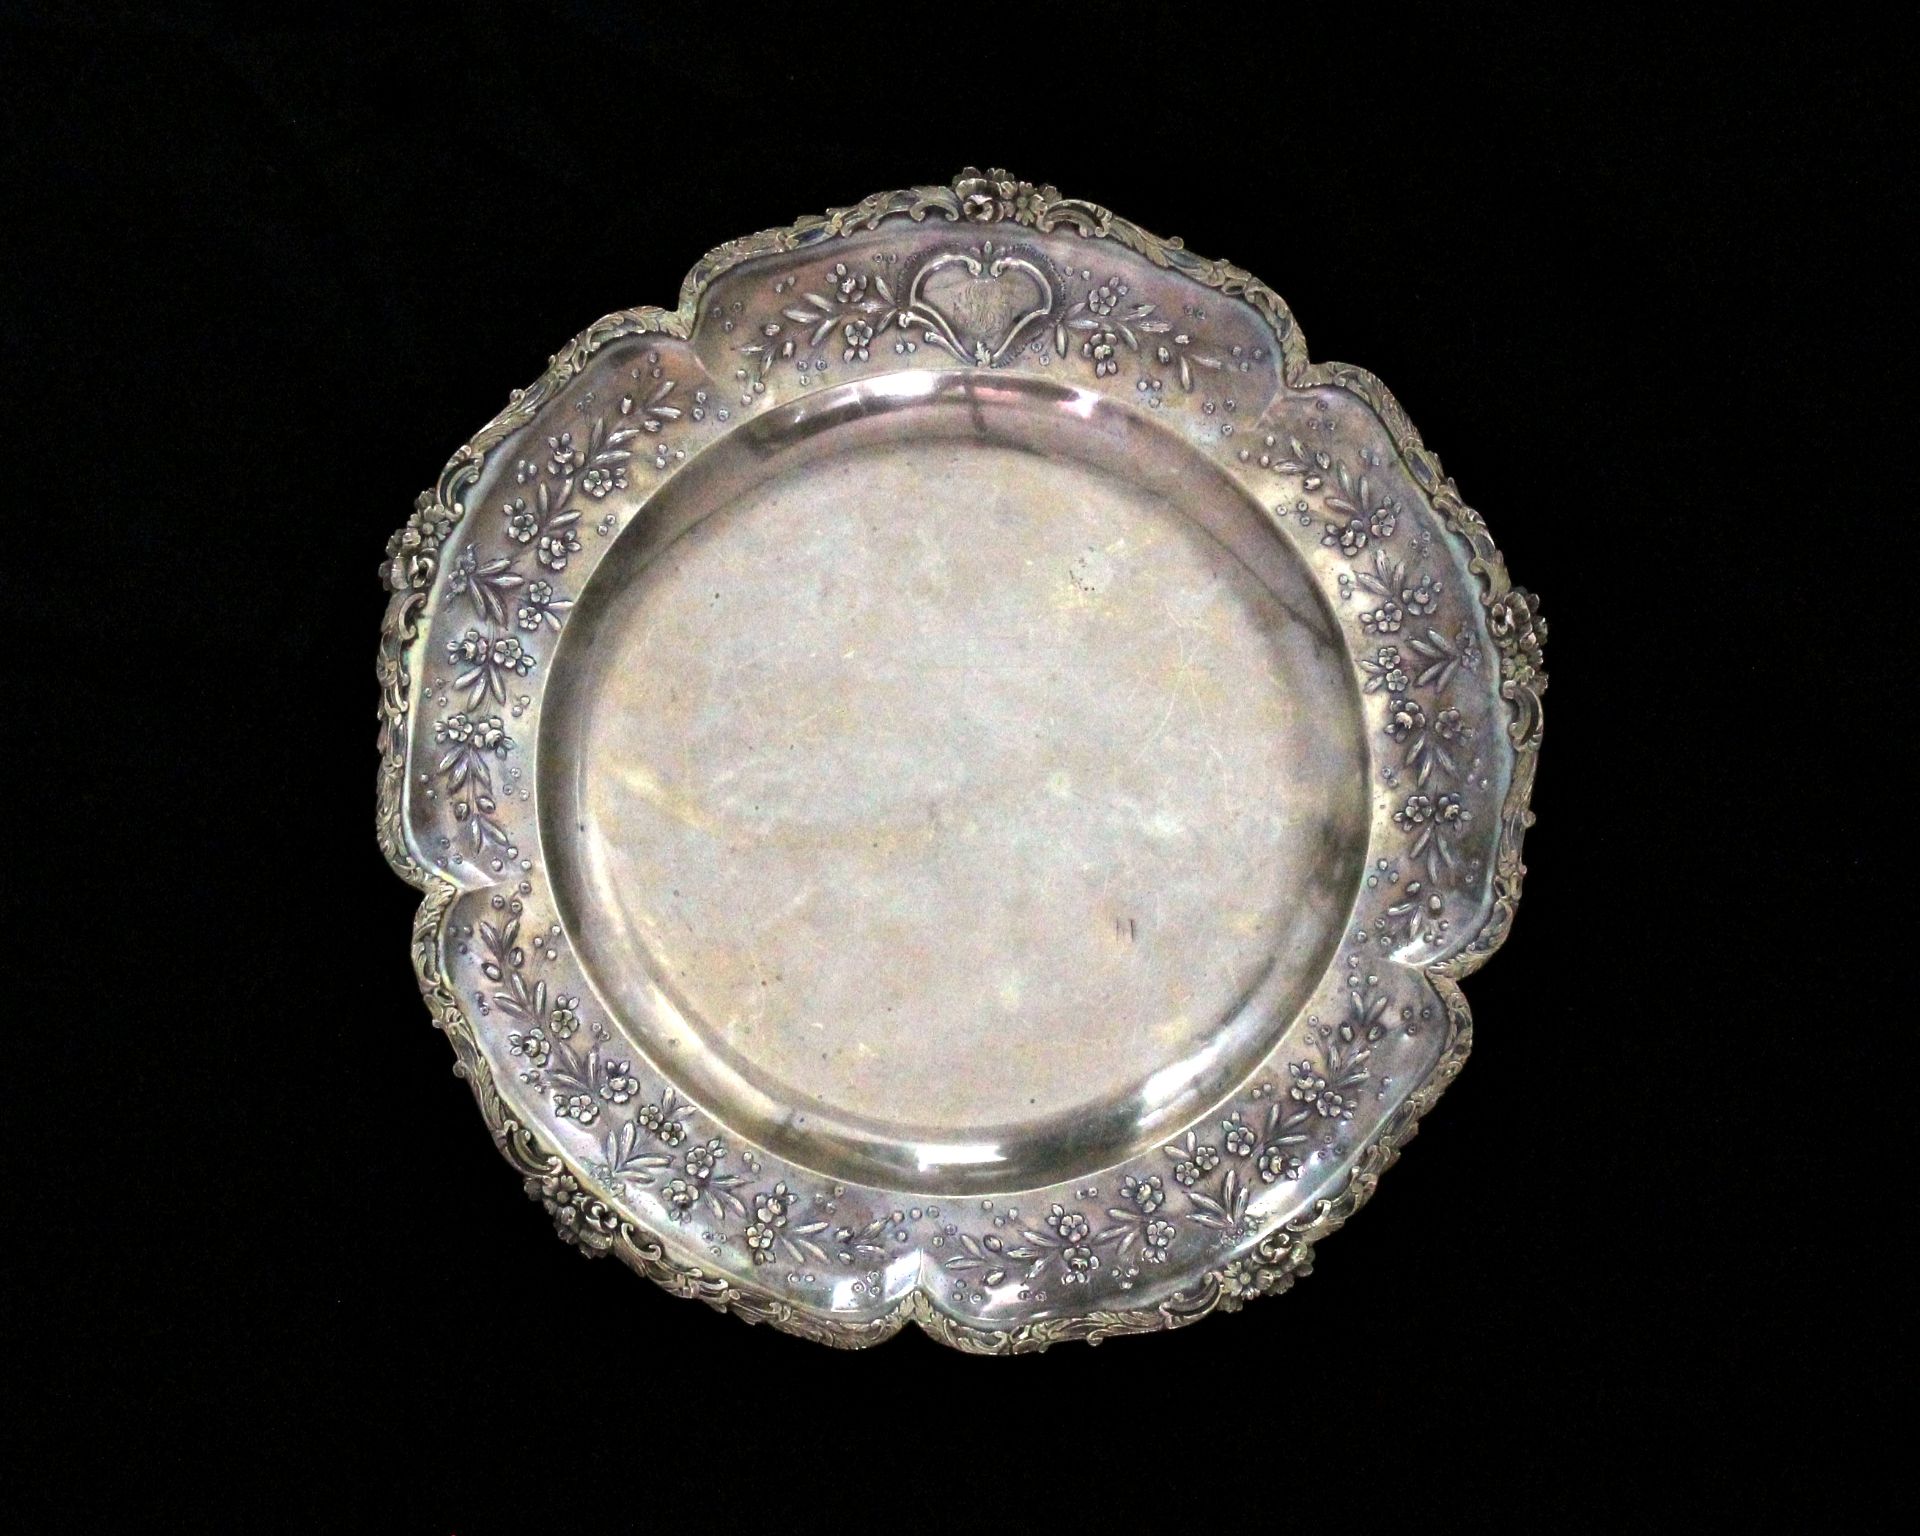 An antique French Silver meat / serving dish circa 1890 of circular form with a raised stylised